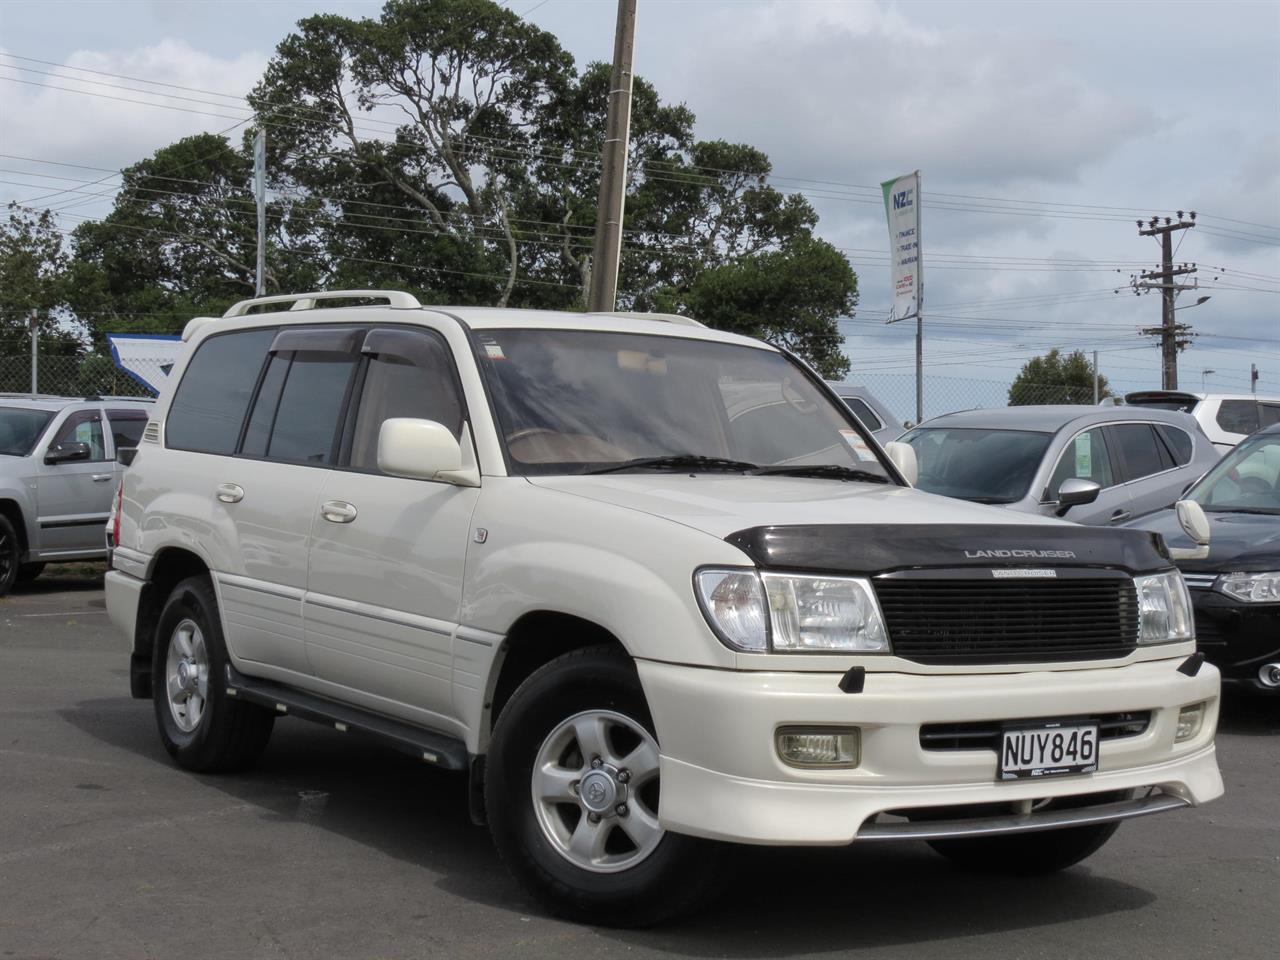 NZC 1998 Toyota LAND CRUISER just arrived to Auckland